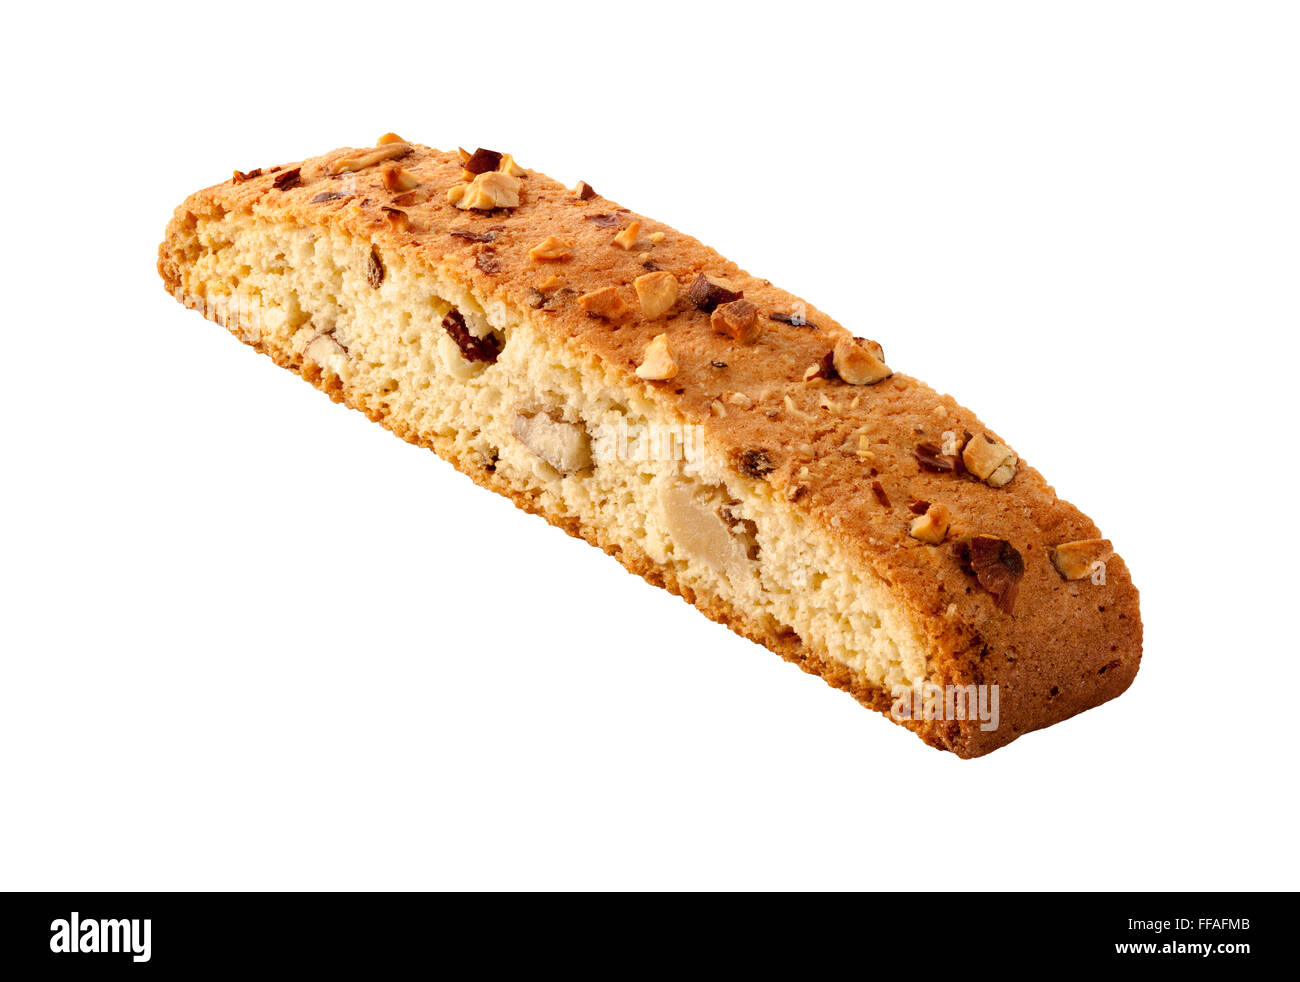 Biscotti Italian almond biscuits that are twice-baked, oblong-shaped, dry, crunchy, and often dipped in a drink. Stock Photo